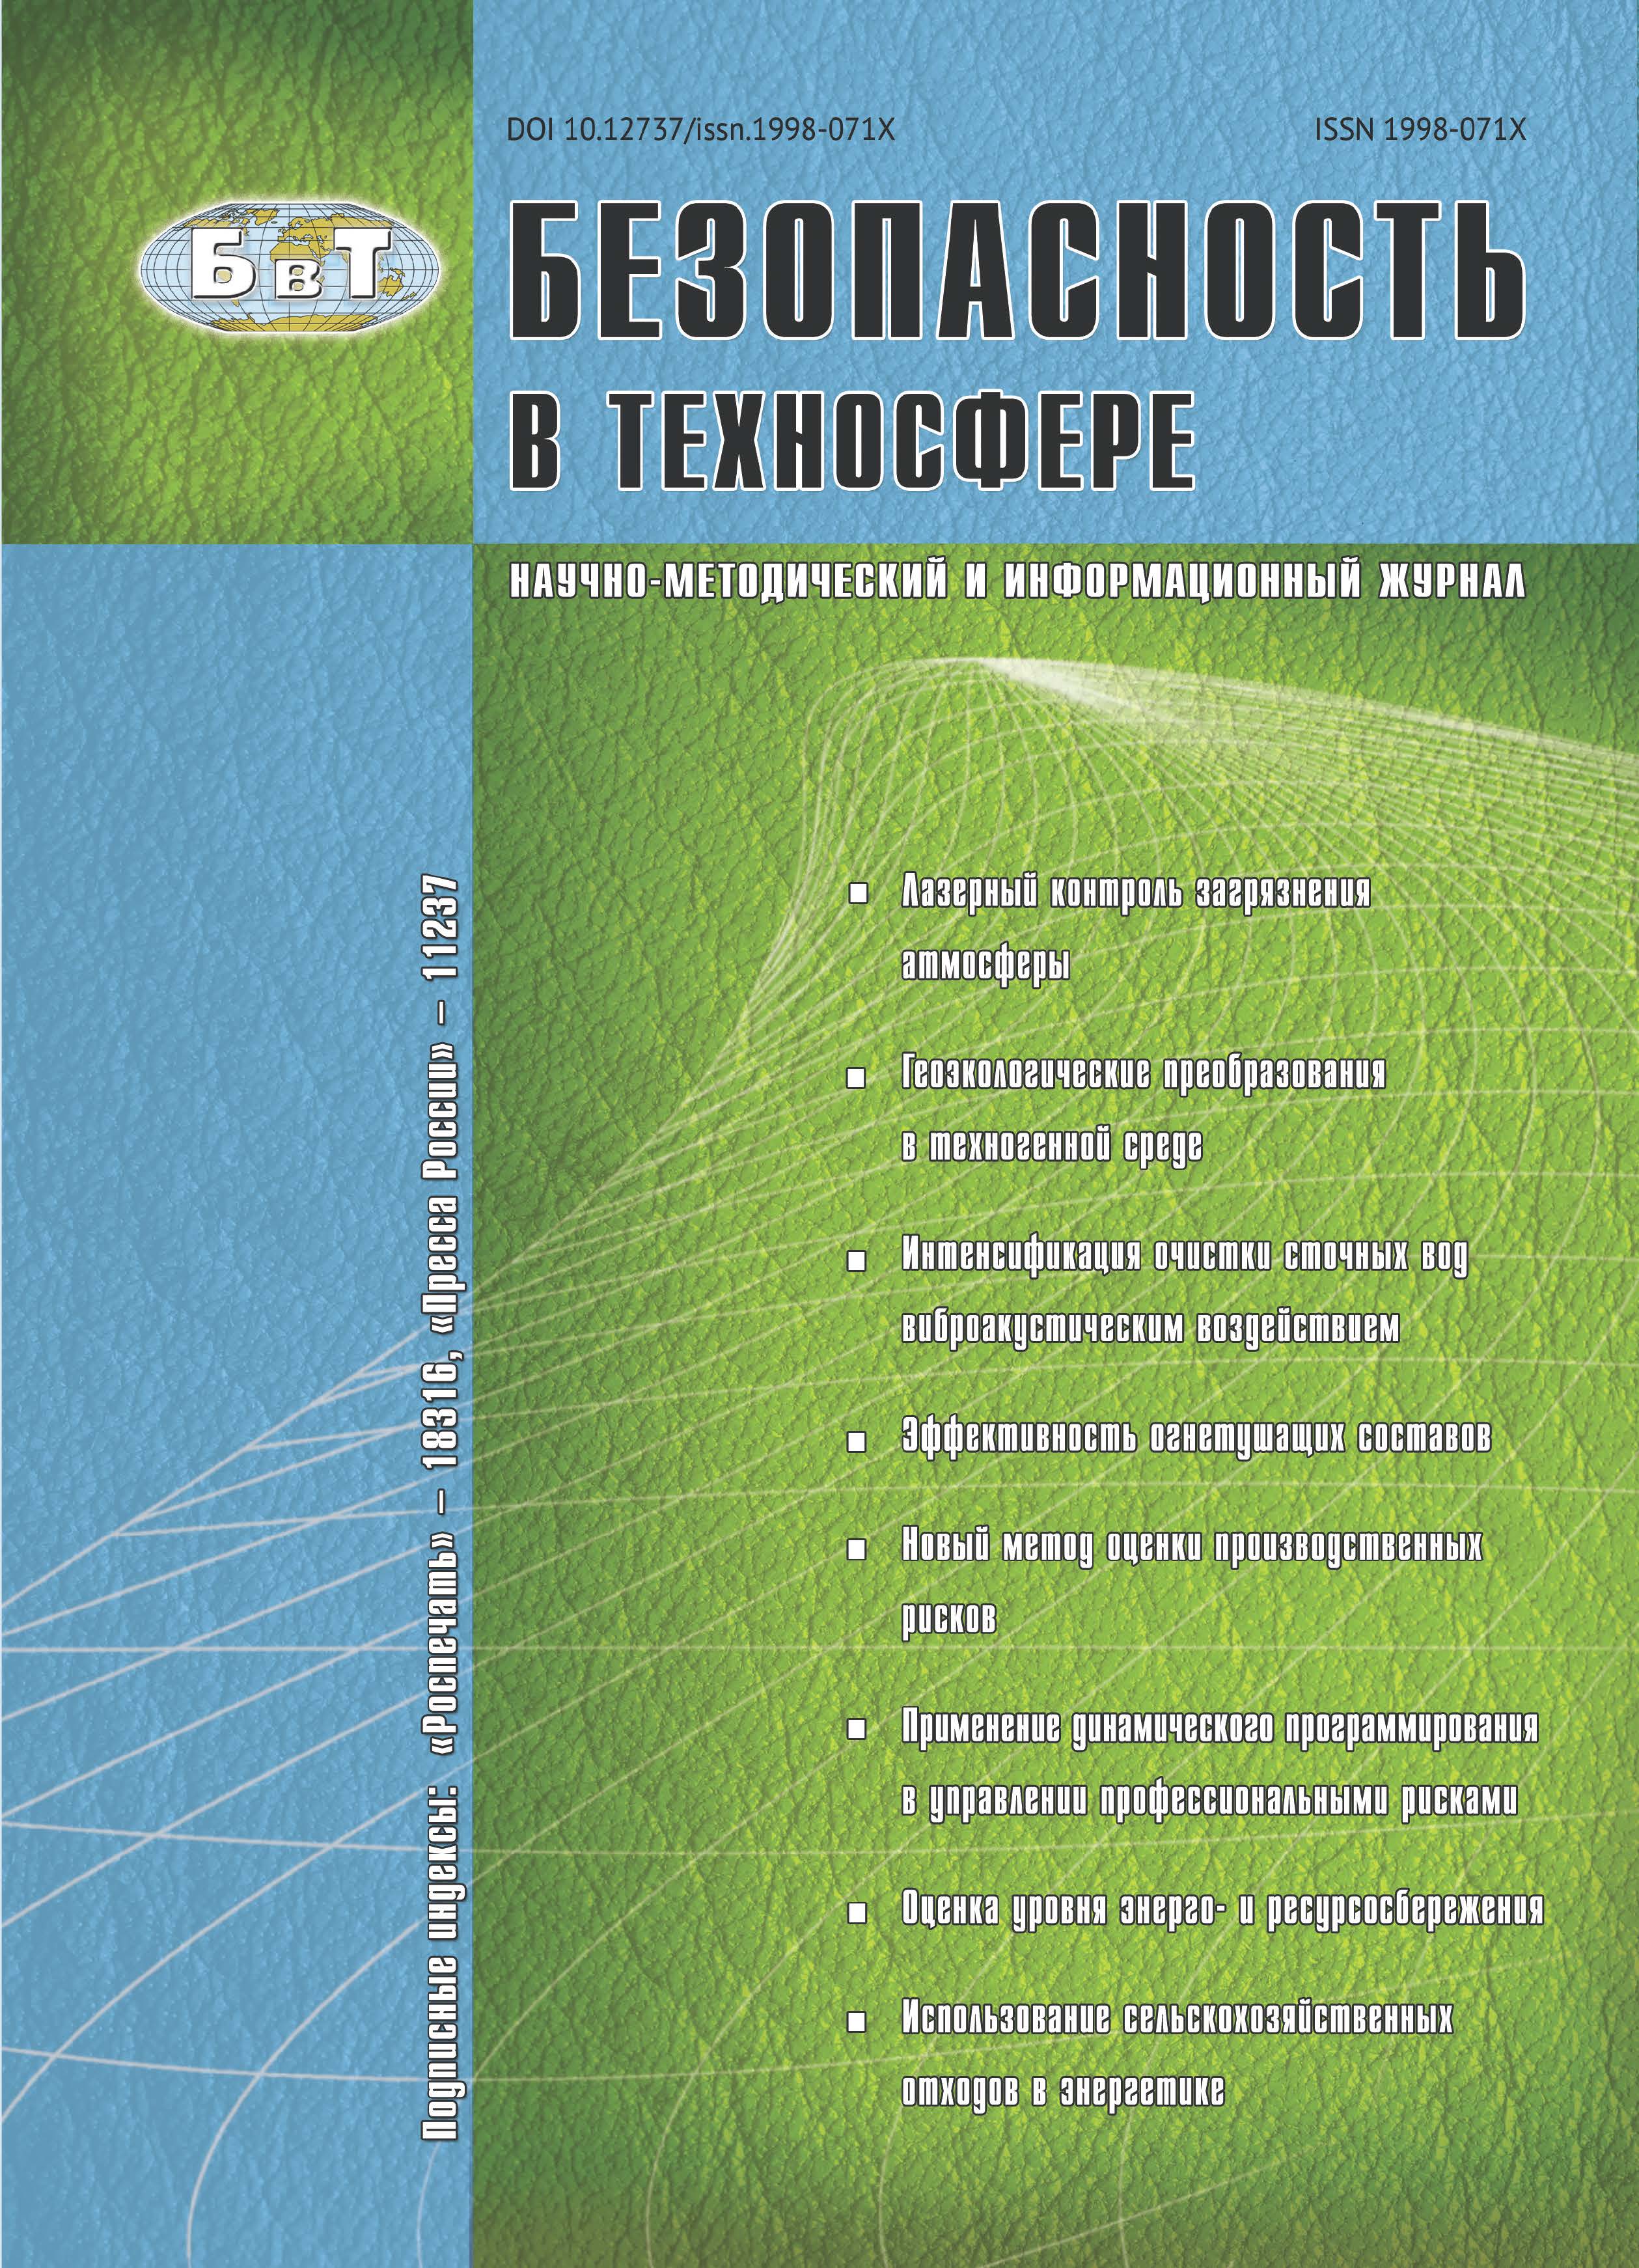                         Drafts of Federal State Educational Standards related to Higher Education  in Technosphere Safety Direction
            